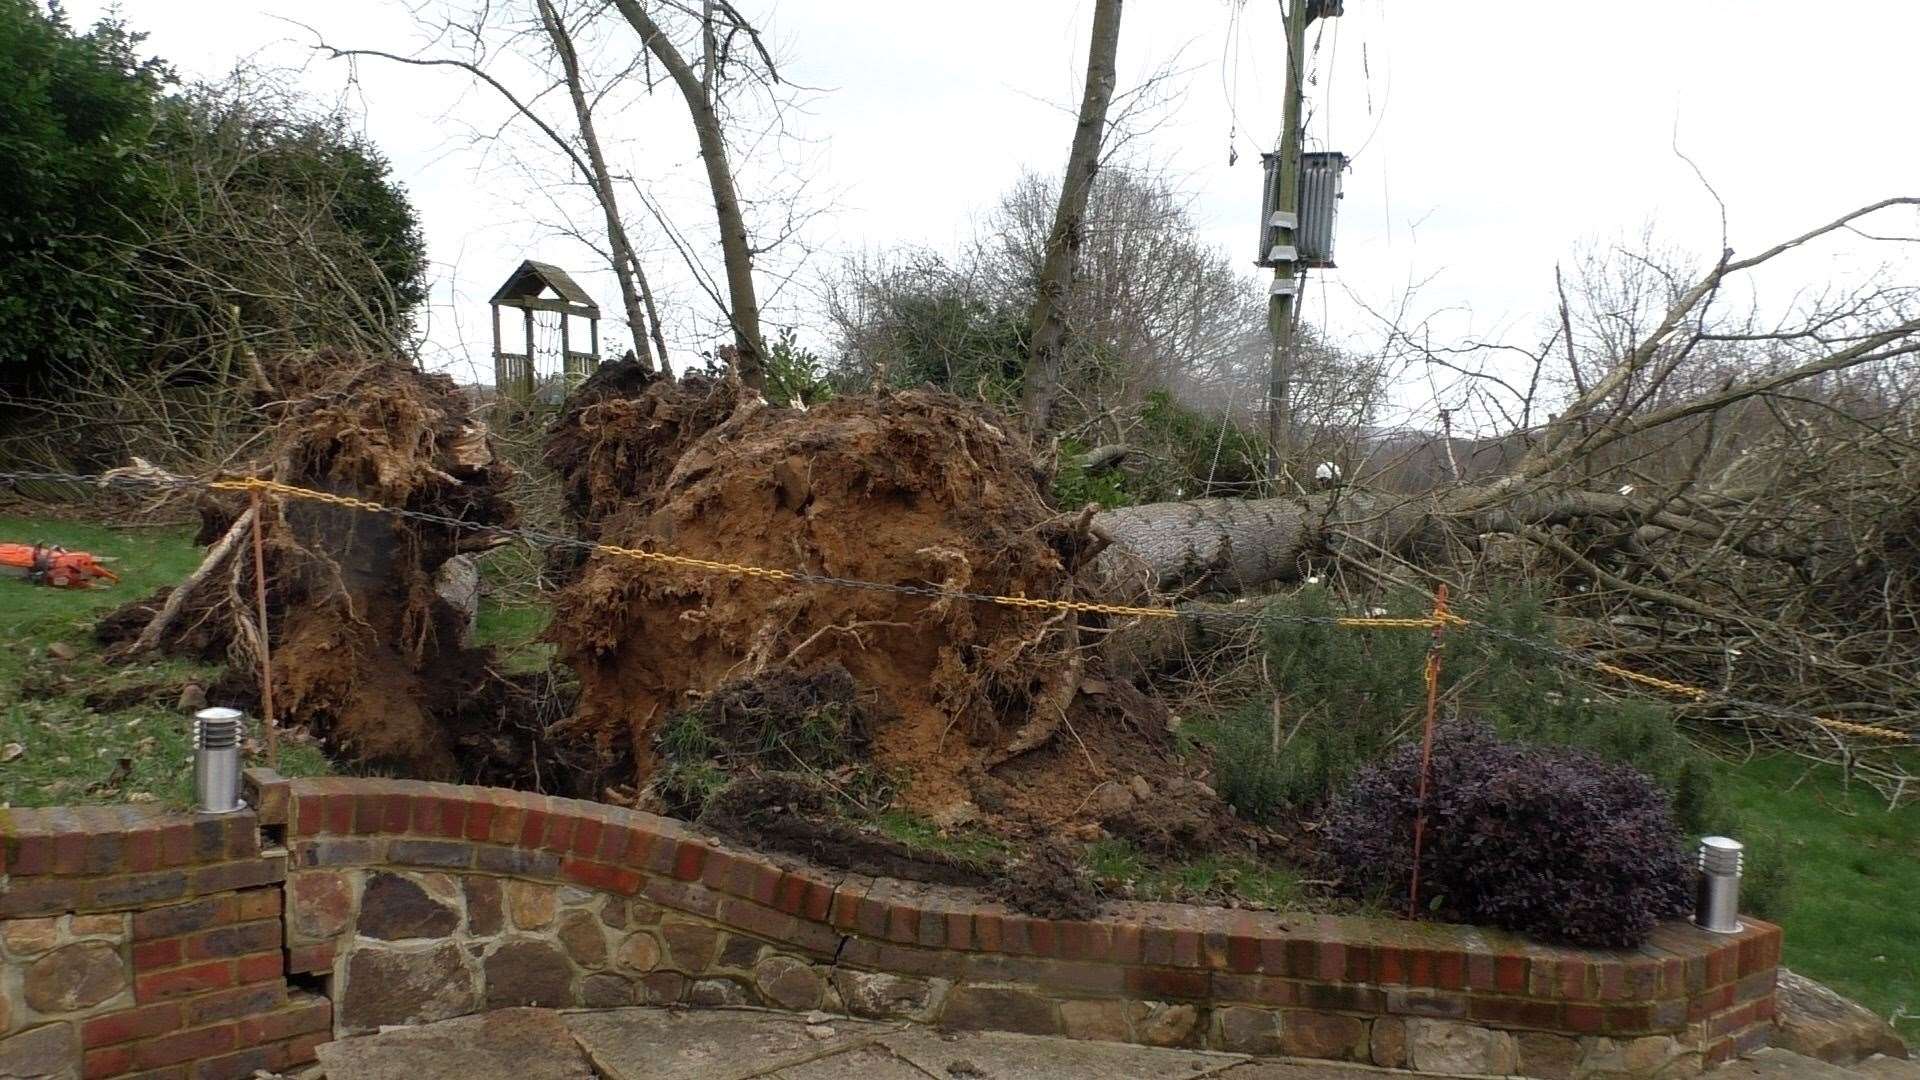 Two trees in David's garden came crashing down at 11am on Friday